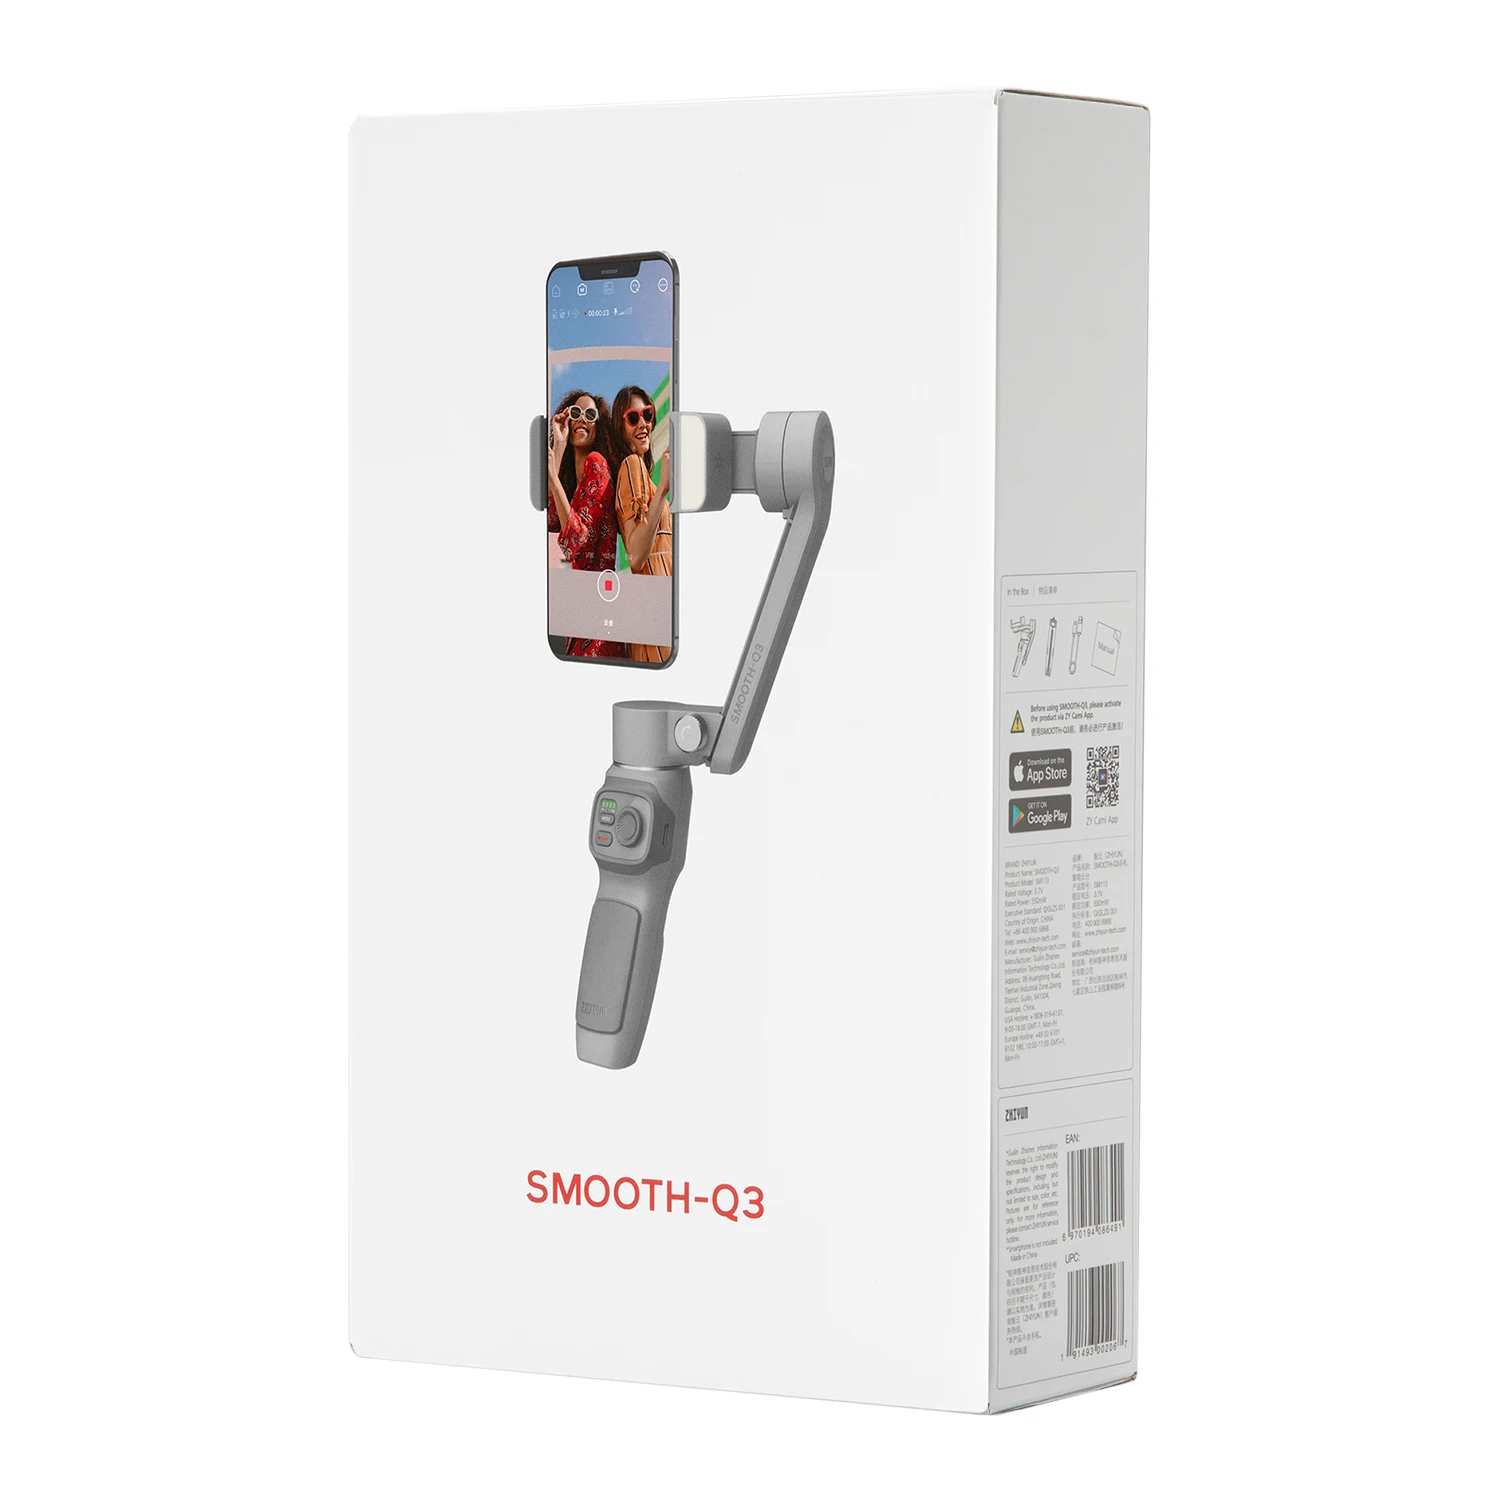 ZHIYUN Official SMOOTH Q3 Gimbal Smartphone 3-Axis Phone Gimbals Portable Stabilizer for iPhone 14 pro max/Xiaomi/Huawei images - 6